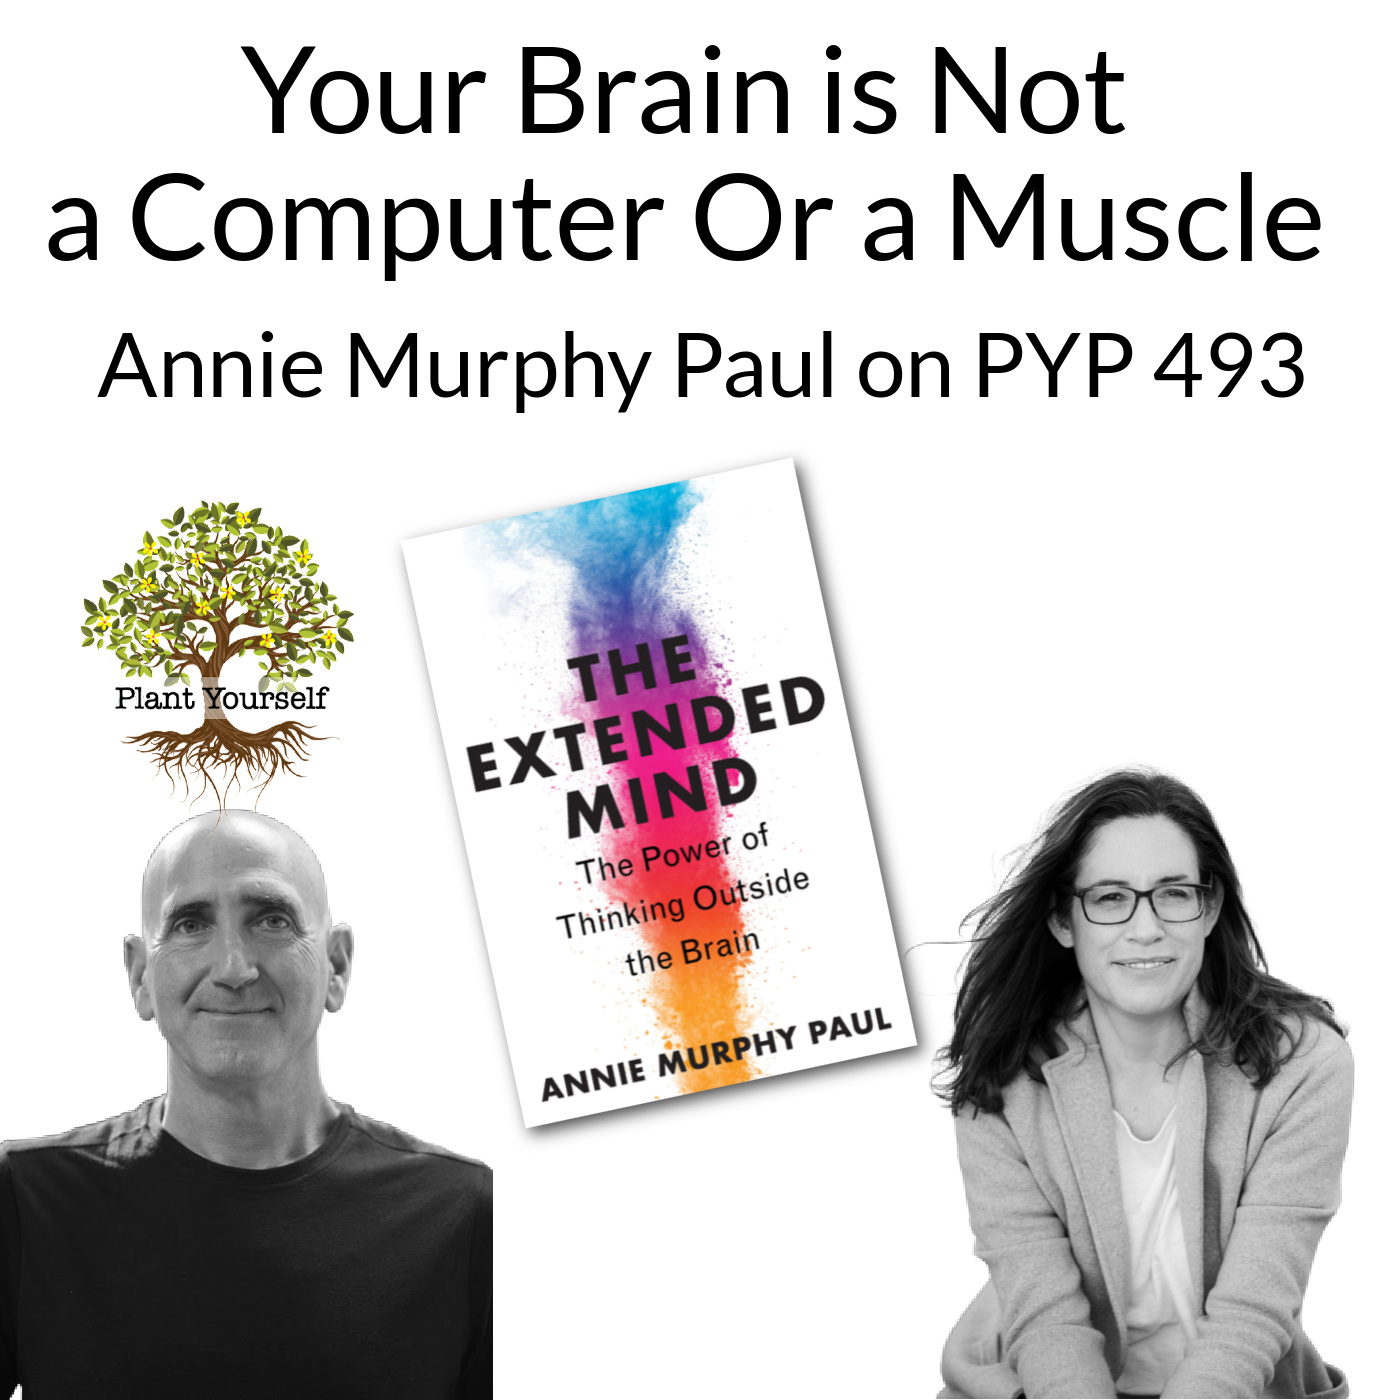 Your Brain is not a Computer or a Muscle: Annie Murphy Paul on PYP 493